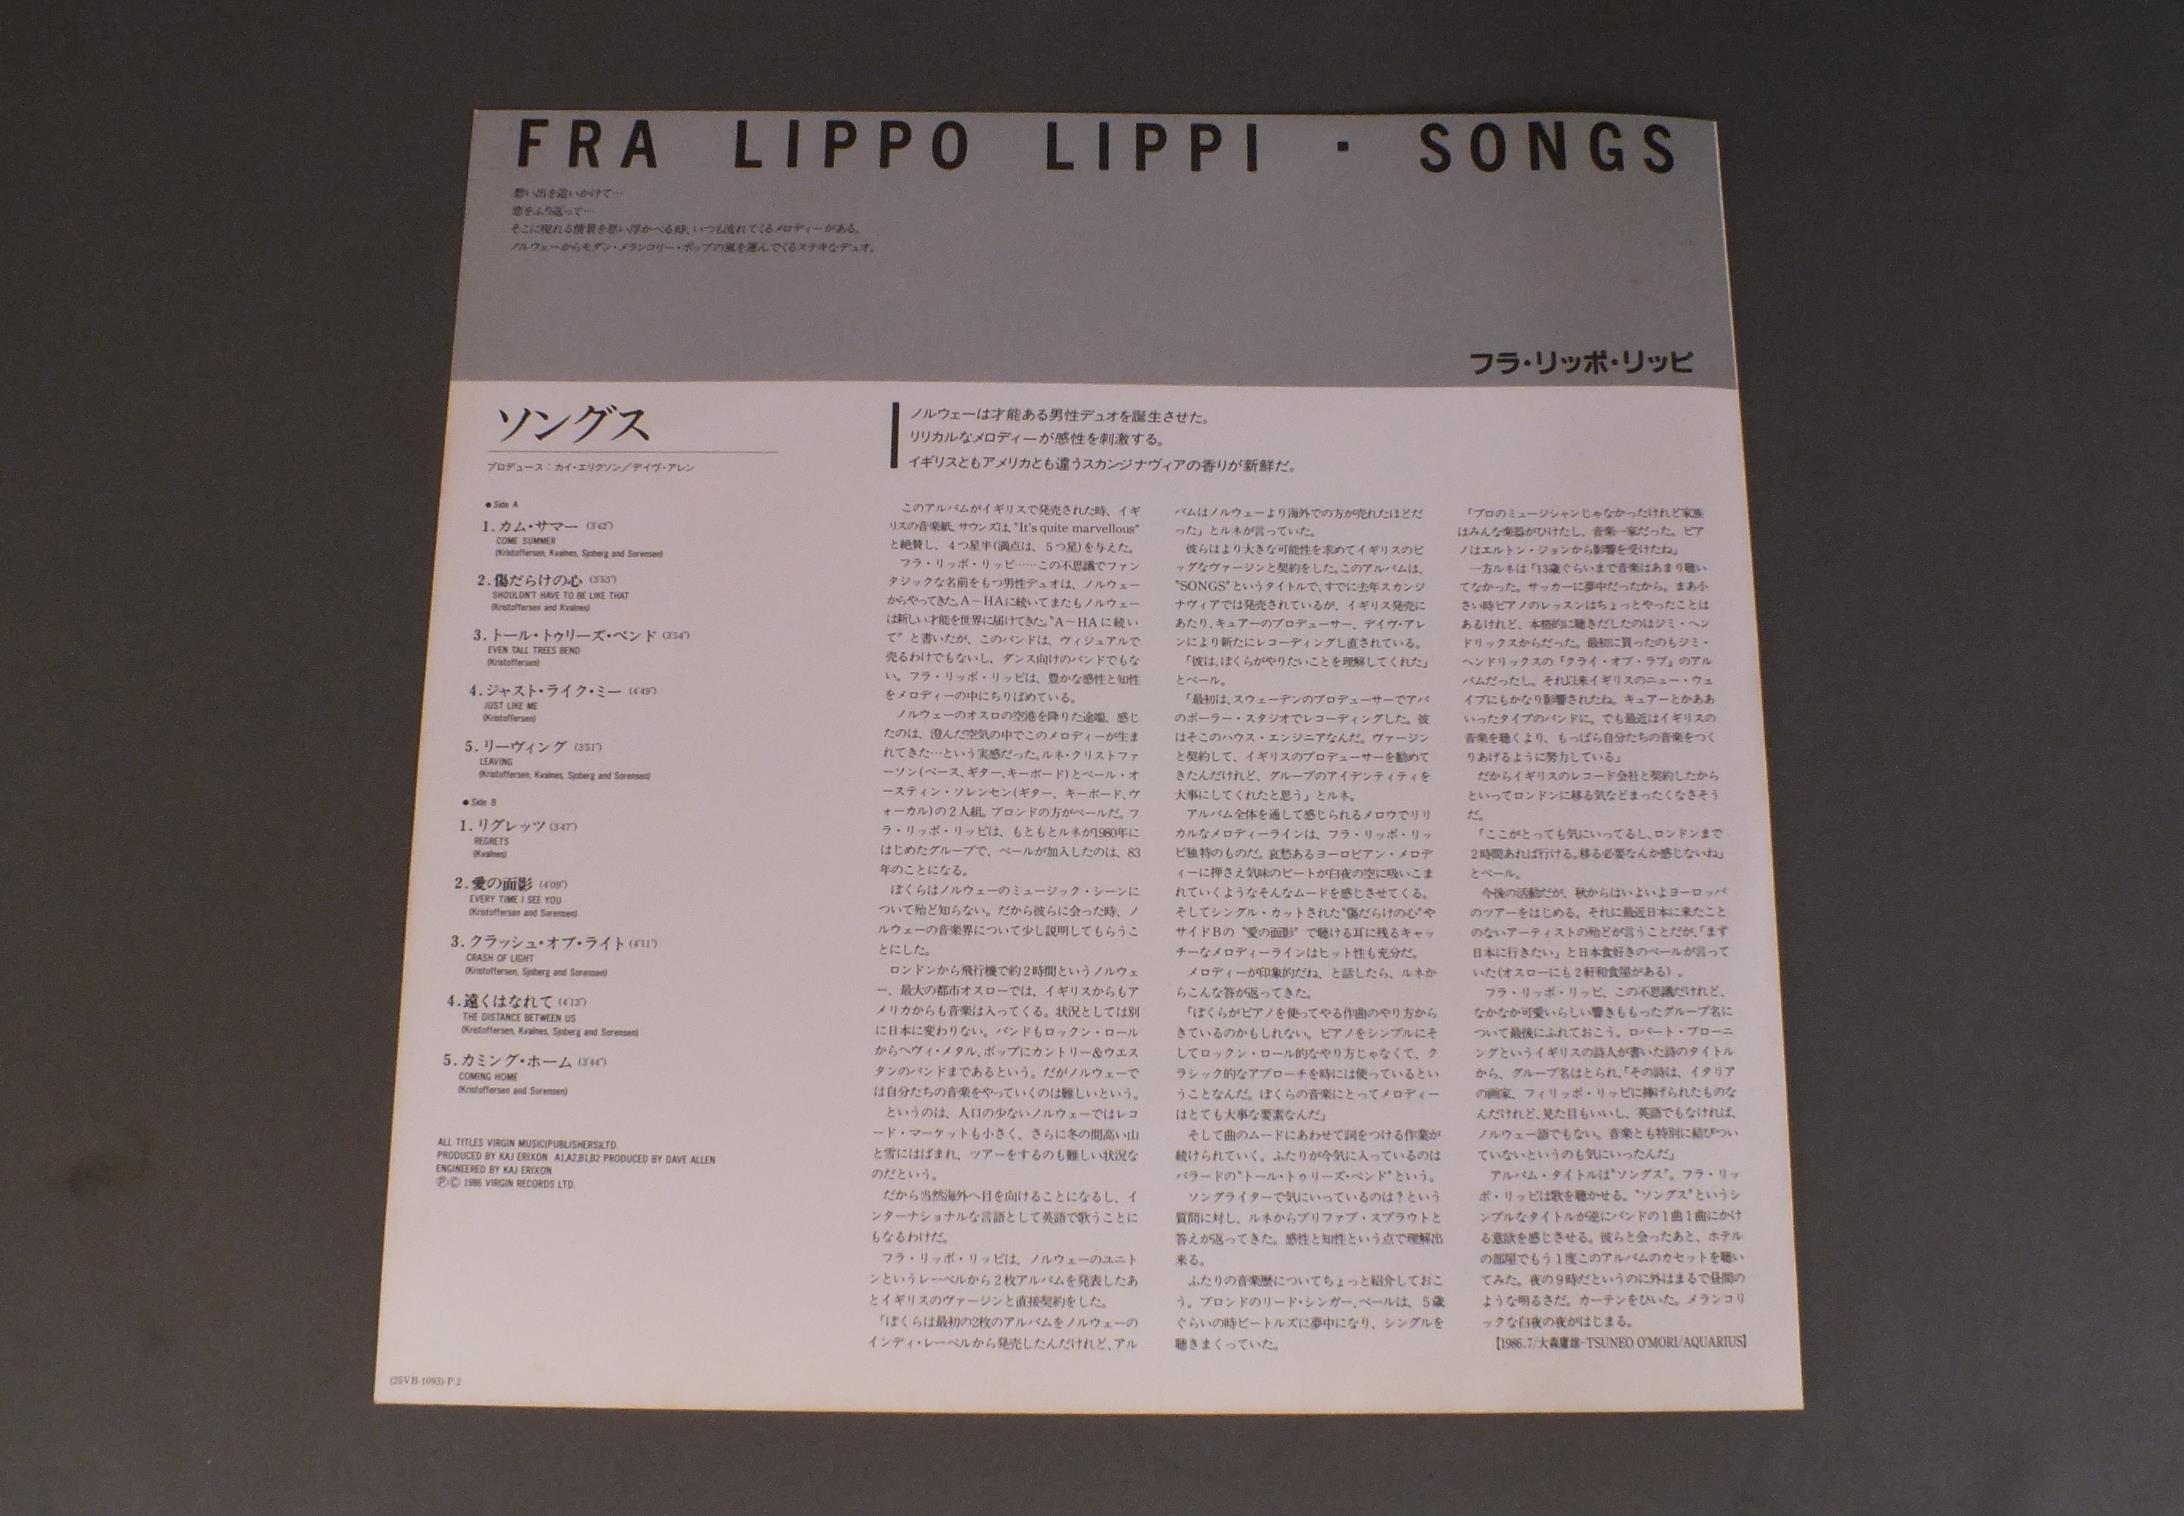 Fra Lippo Lippi - Songs at Discogs